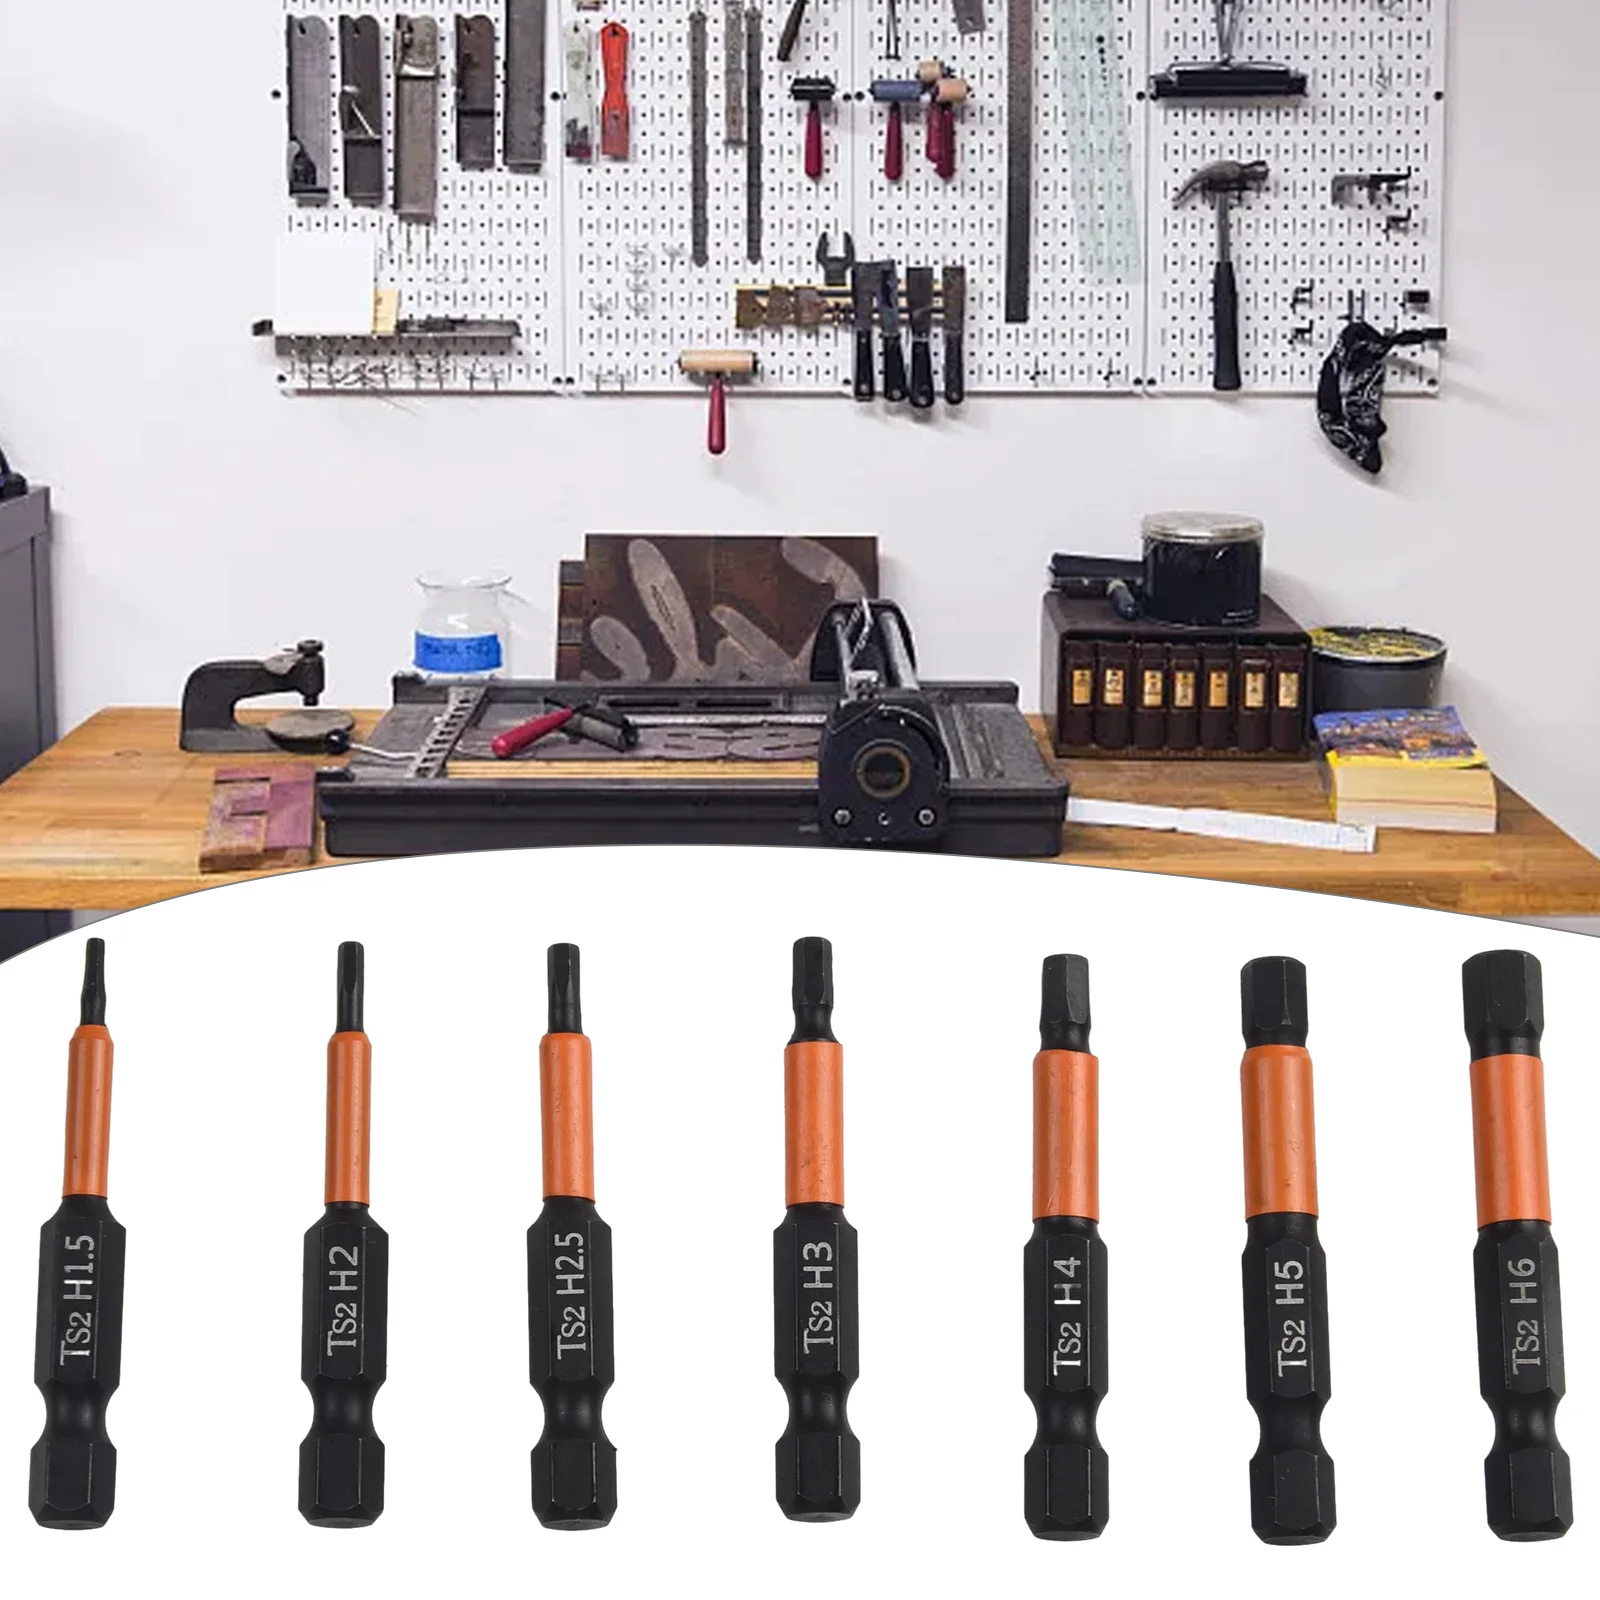 

Magnetic Hex Head Wrench Drill Bit Set 7PC Screwdriver Bit Set for Easy Installation Durable Alloy Steel Material